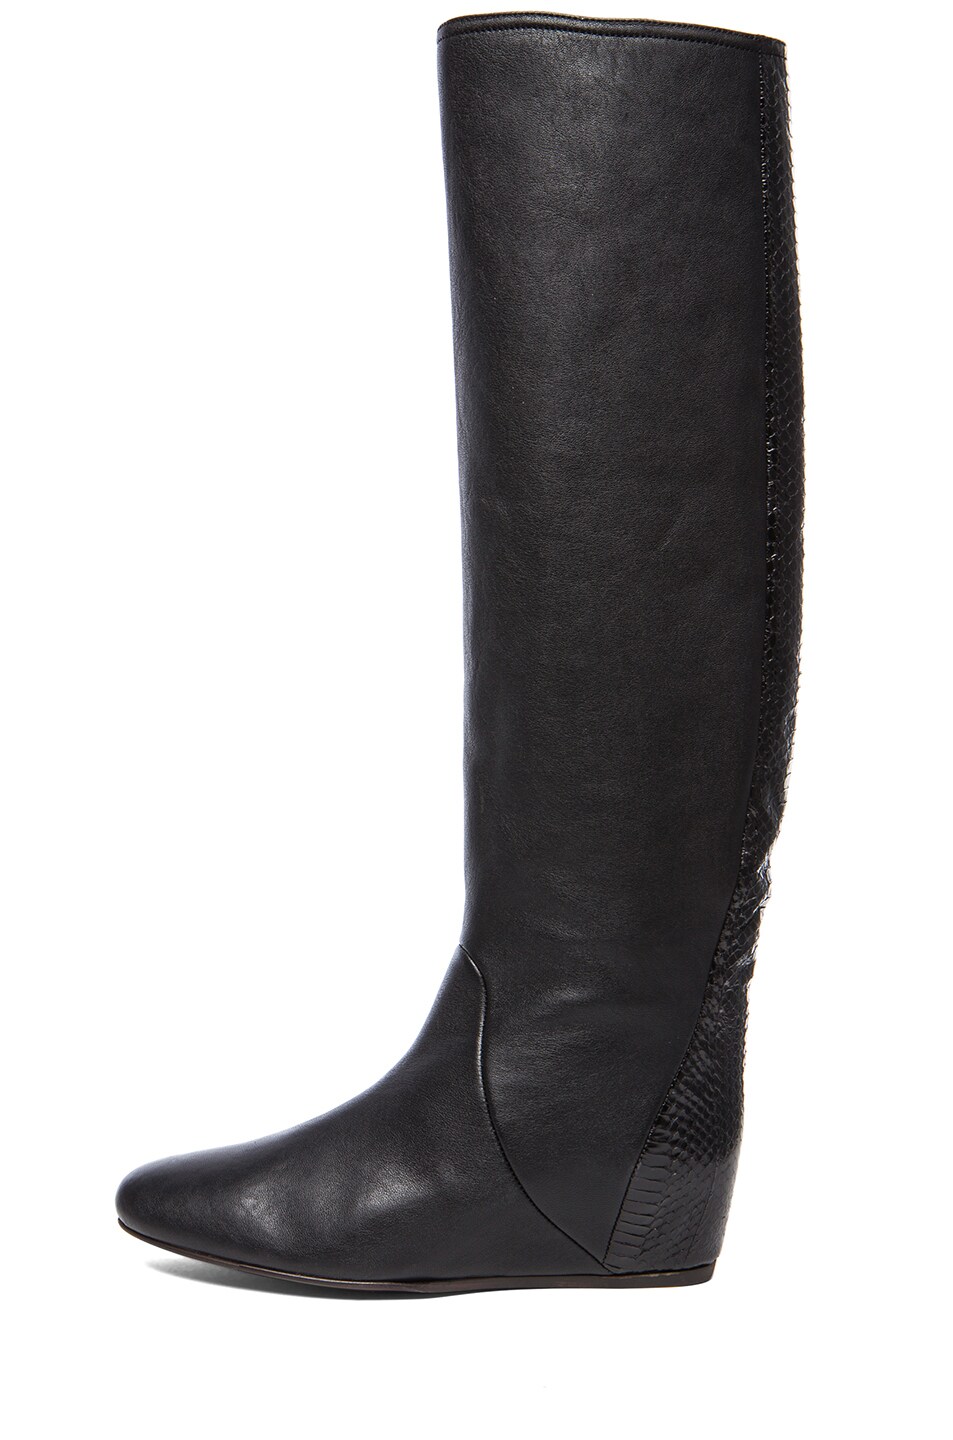 Image 1 of Lanvin Wedge Aidden Sheepskin Leather Booties with Snake Panel in Noir